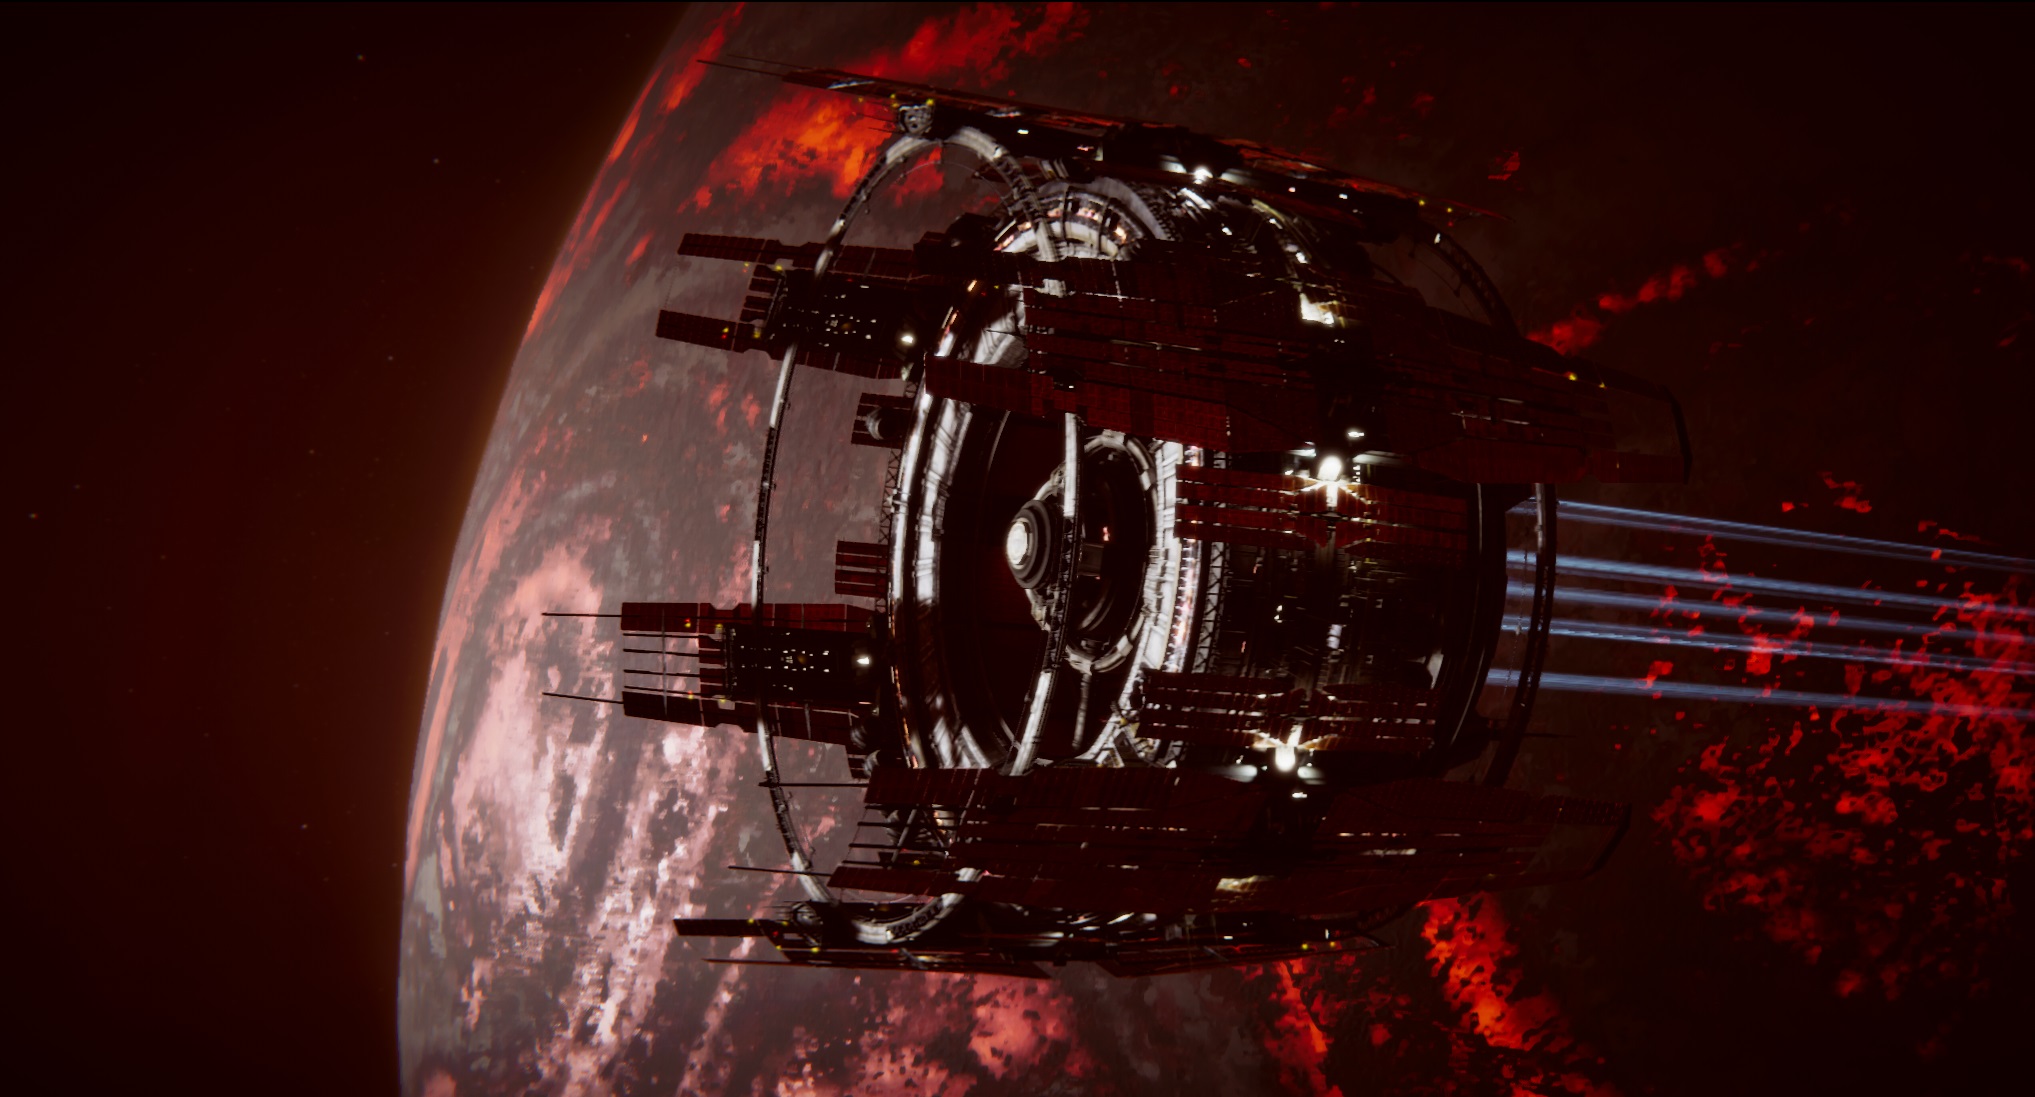 Ixion's space station bathed in an ominous red glow